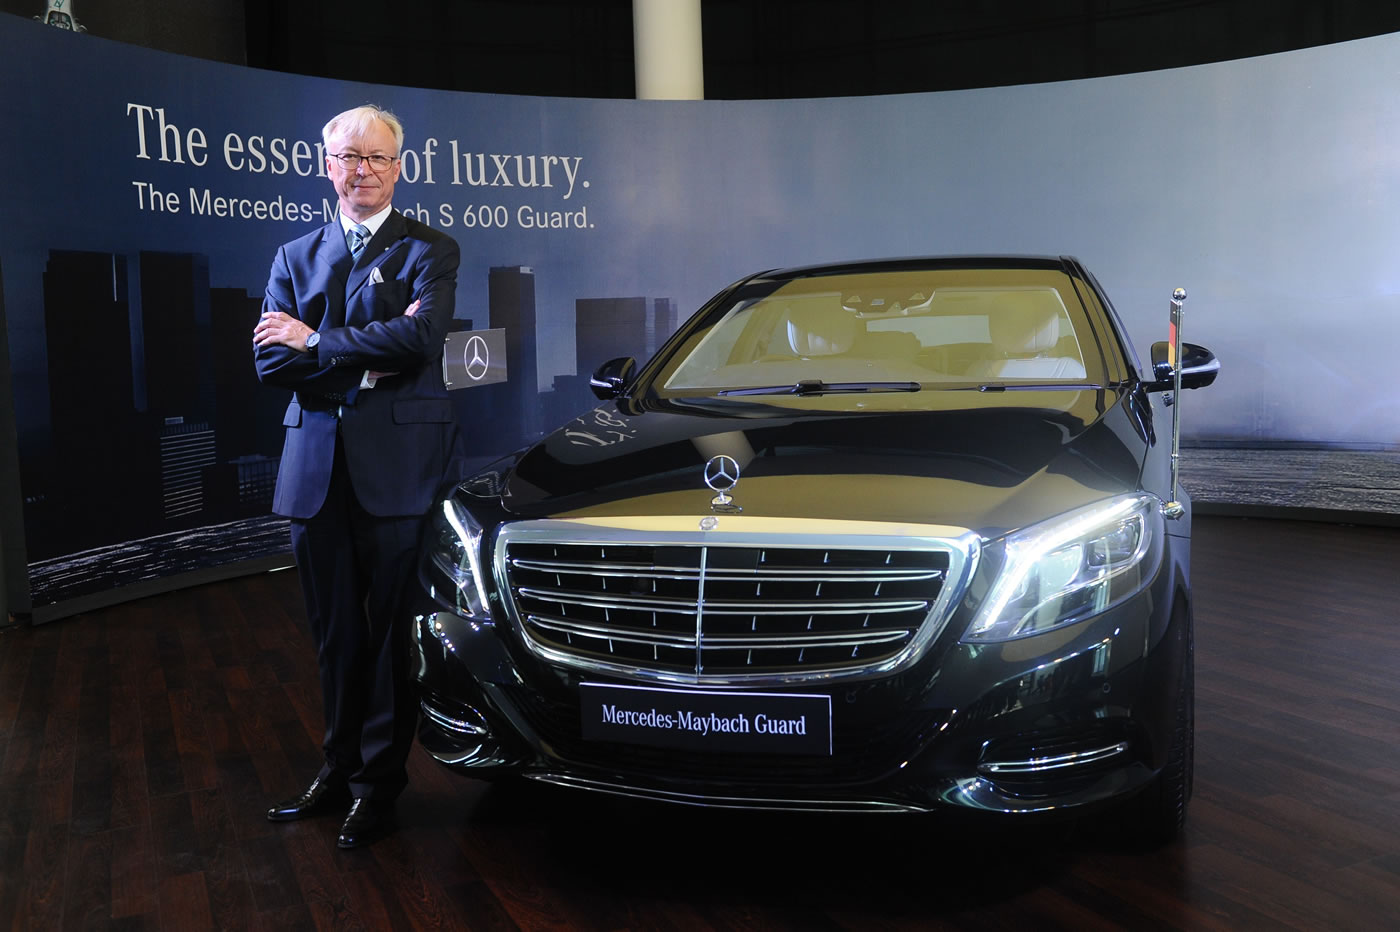 Mercedes Benz Launches High Security Maybach S600 Guard In India For Rs 10 5 Crore